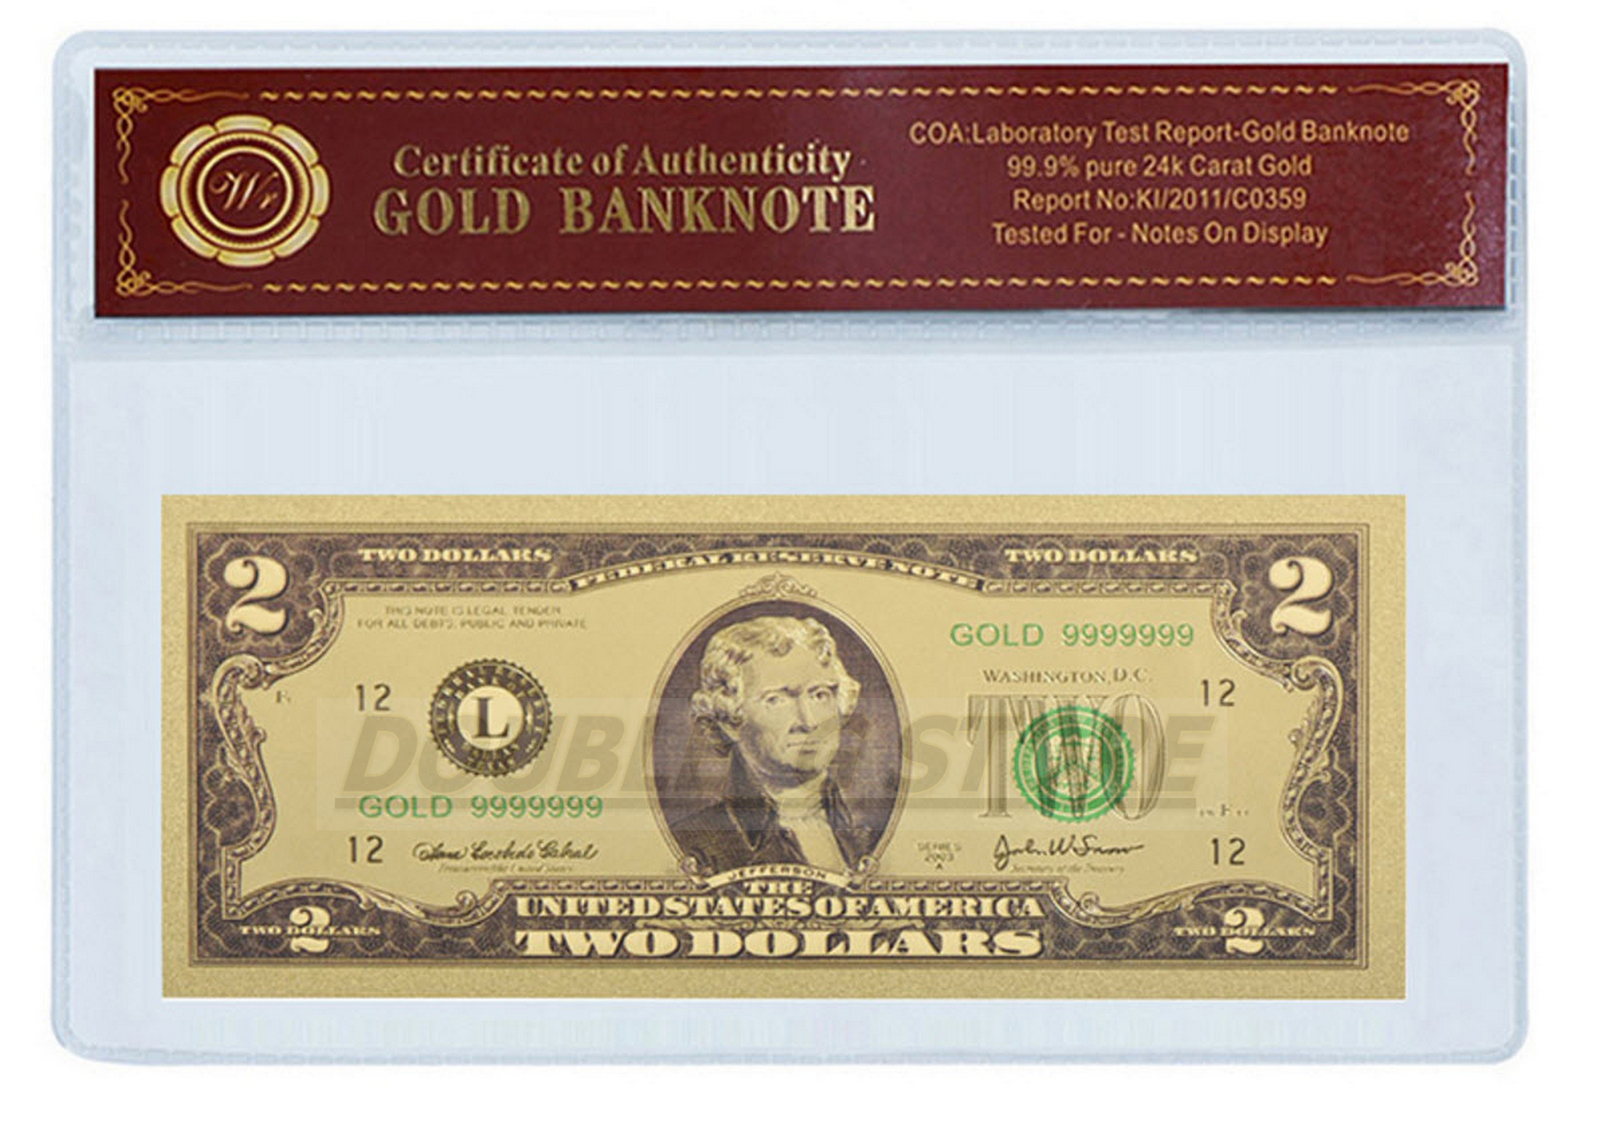 24K 999 GOLD $2 DOLLAR BANKNOTE WITH COA (CERT OF AUTHENTICITY) BU